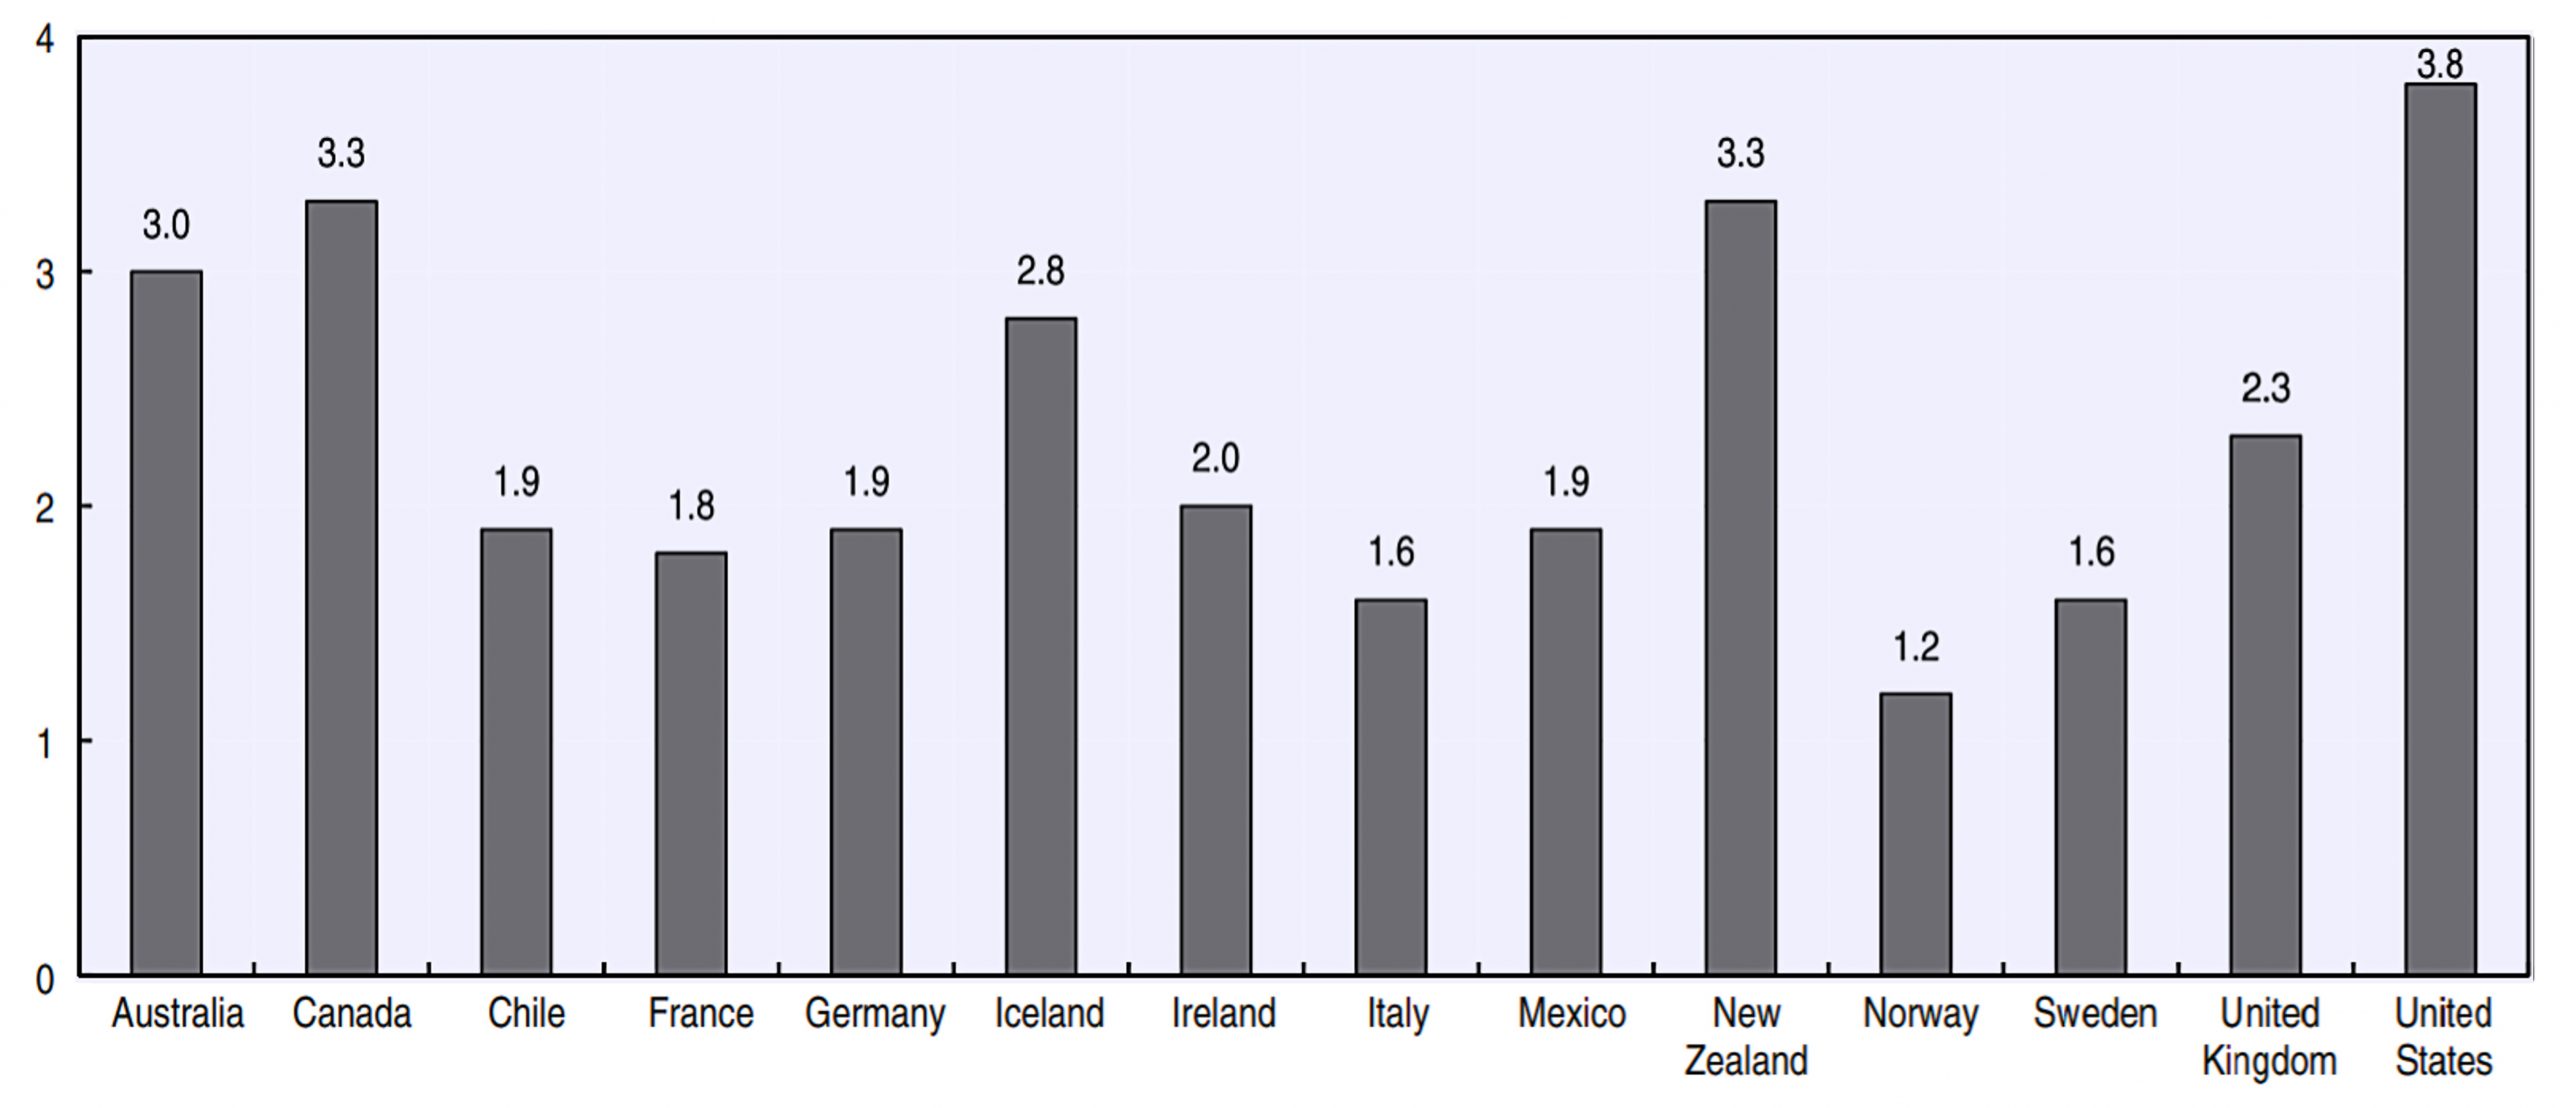 Figure. 22-1. Source: Figure 1.1. OECD calculations based on the surveys reported in Annex Table 1.A.1. of the Society at a Glance, OECD Social Indicators, 2019. Note: Countries are not ordered given that estimates of the LGB population rely on survey methods that differ across countries.